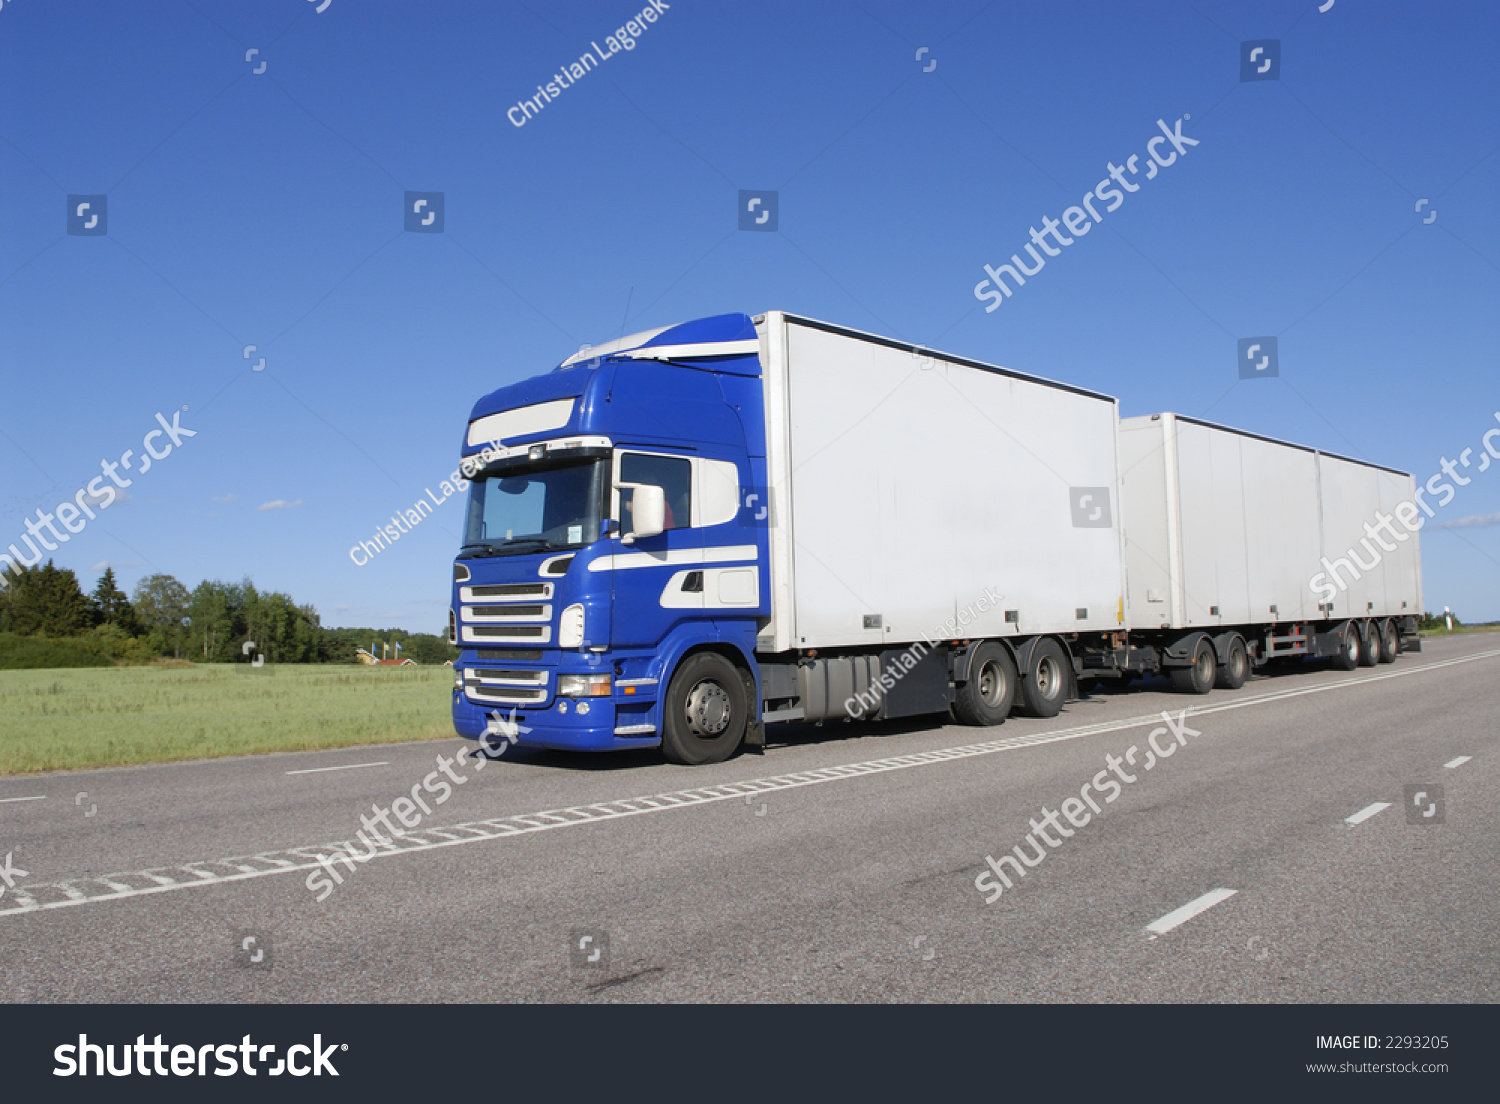 blue and white lorry, truck driving in country-road #2293205